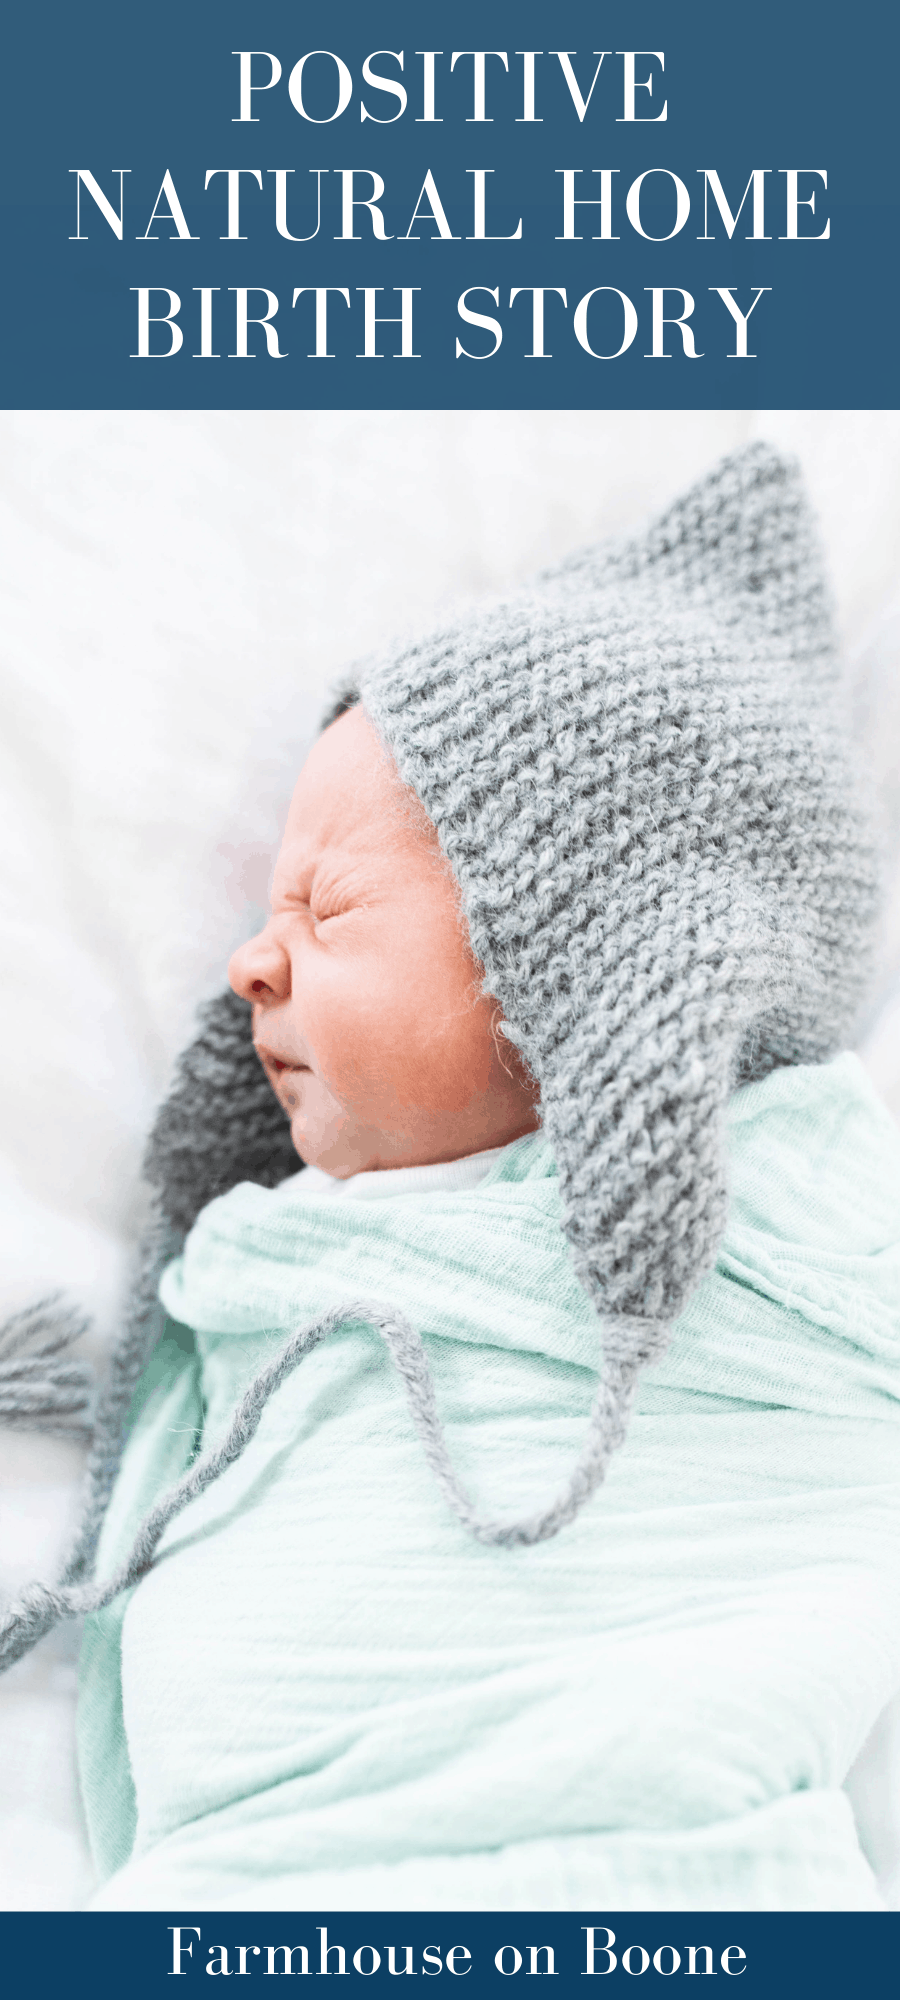 baby in knit hat and teal swaddle blanket